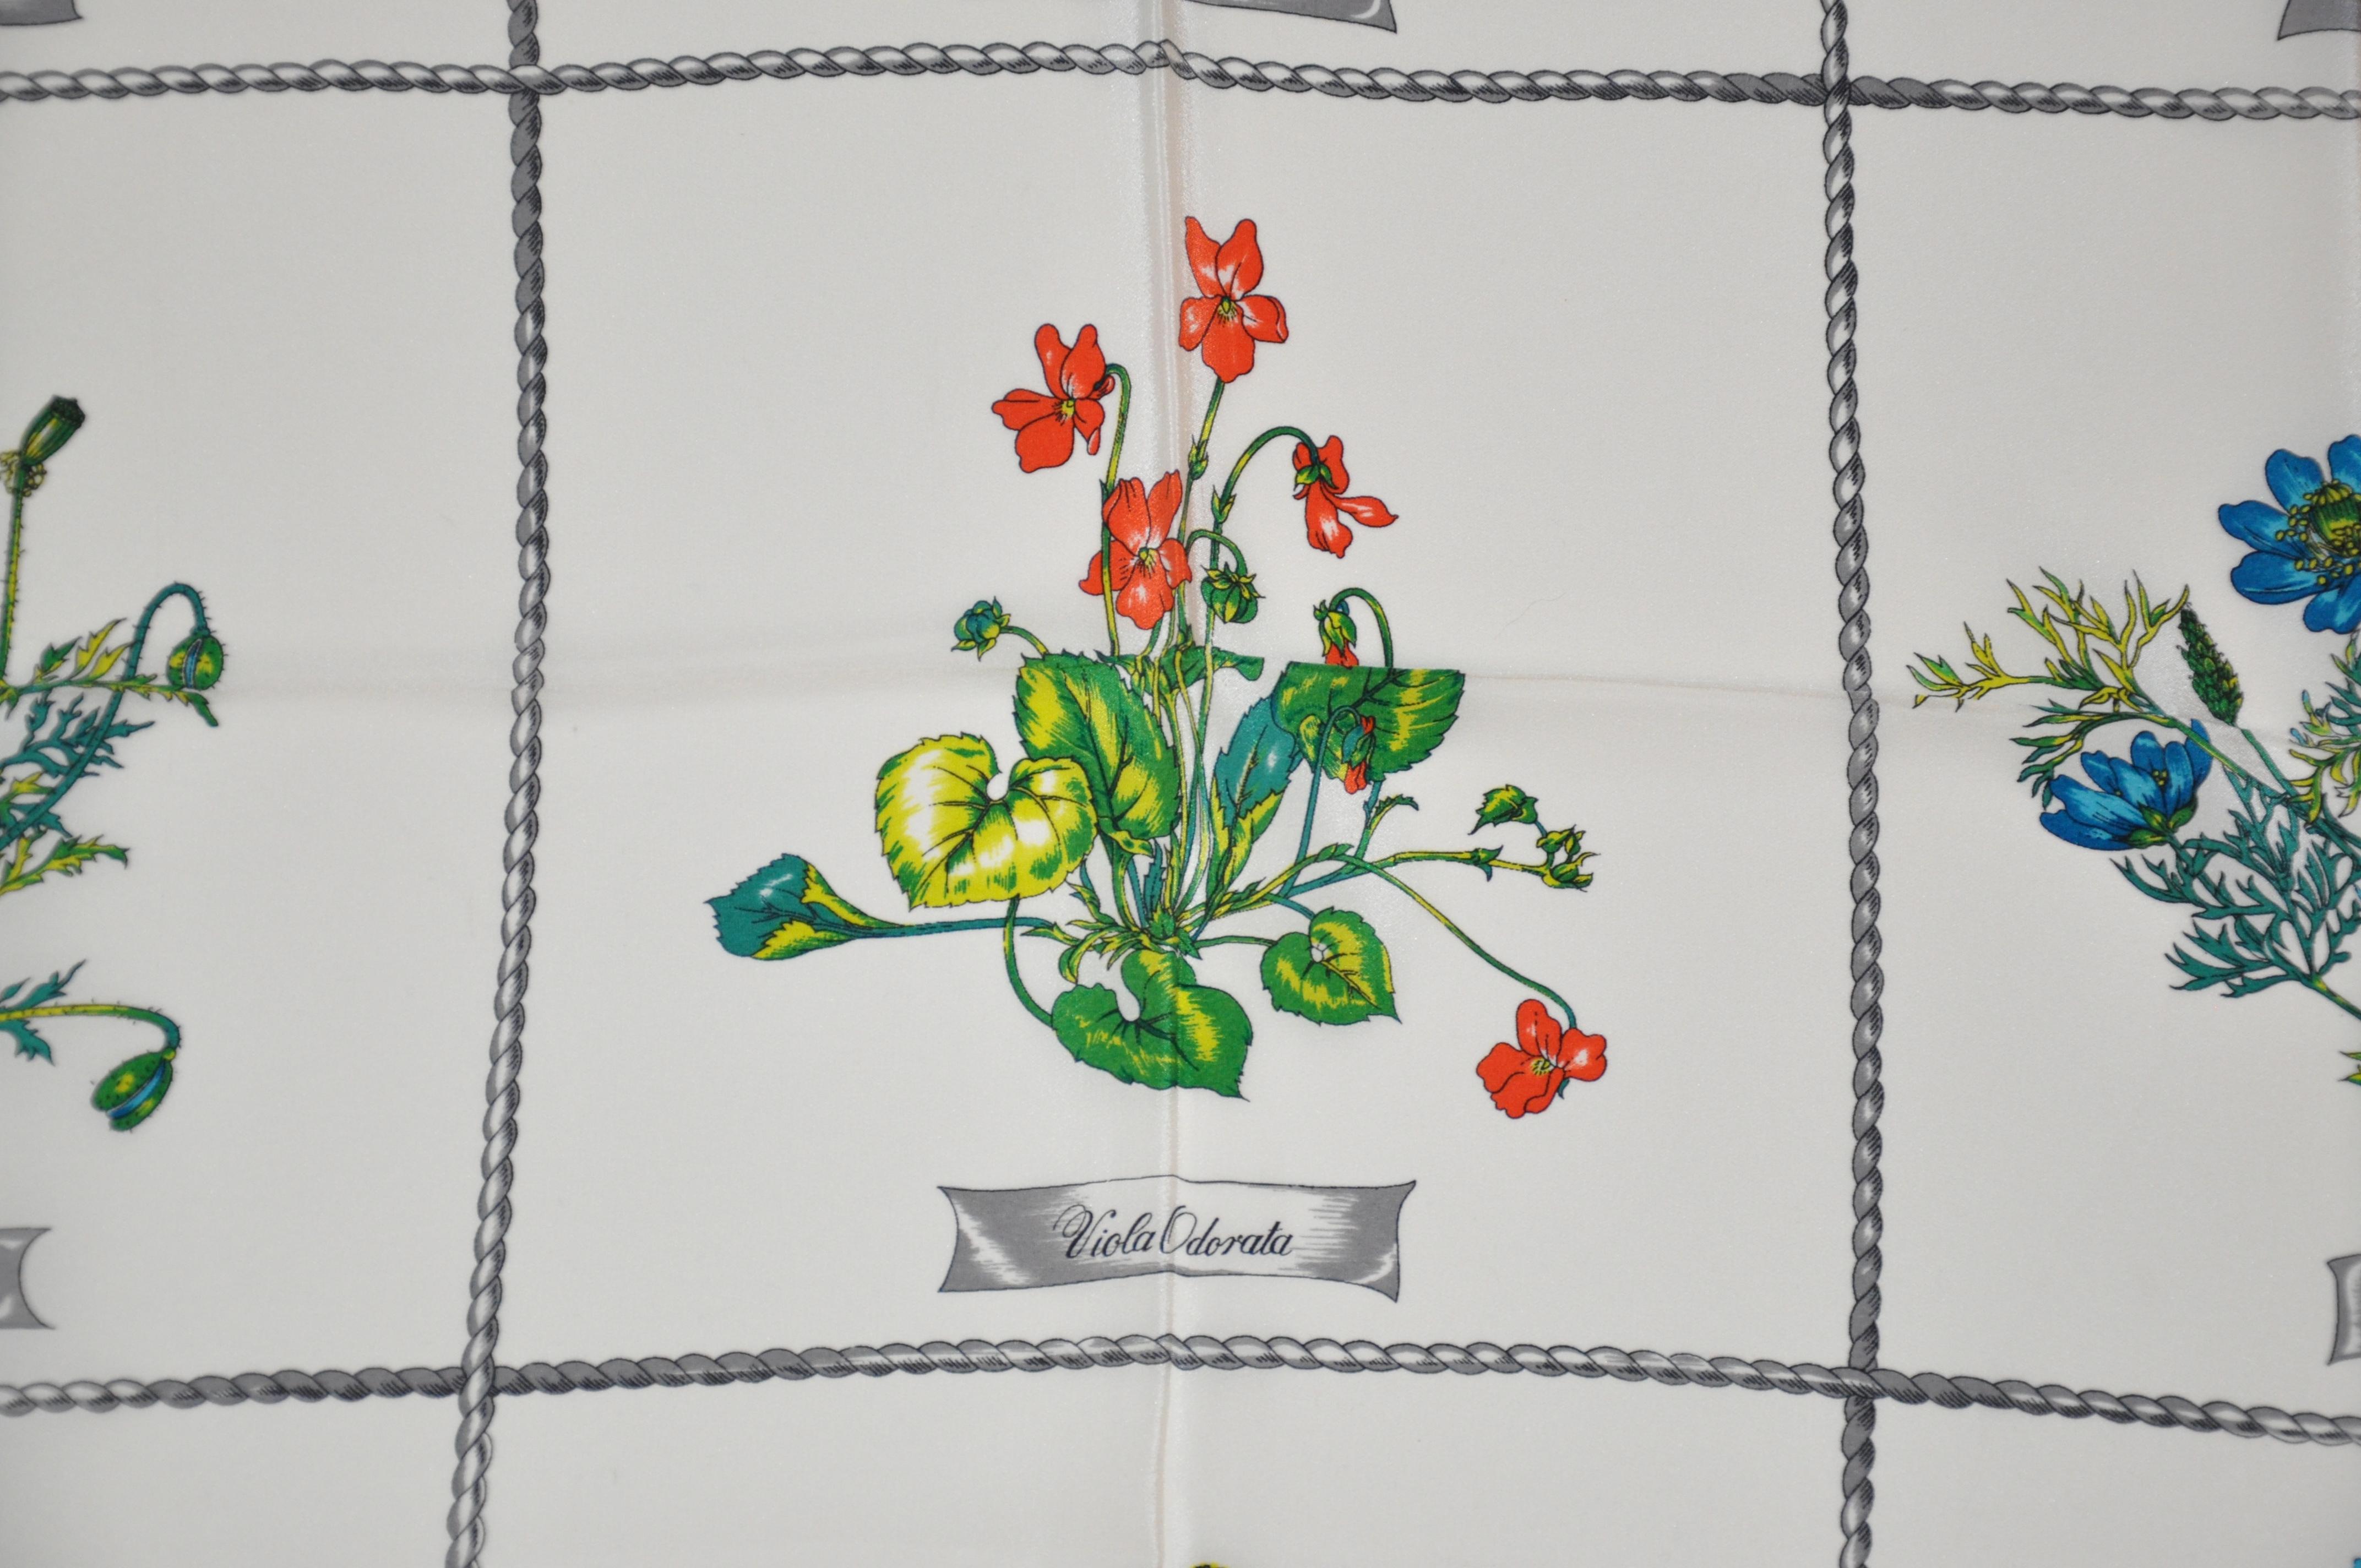 Gentilucci Wonderful Collection of Floral Listings w/ Yellow Borders Silk Scarf For Sale 1